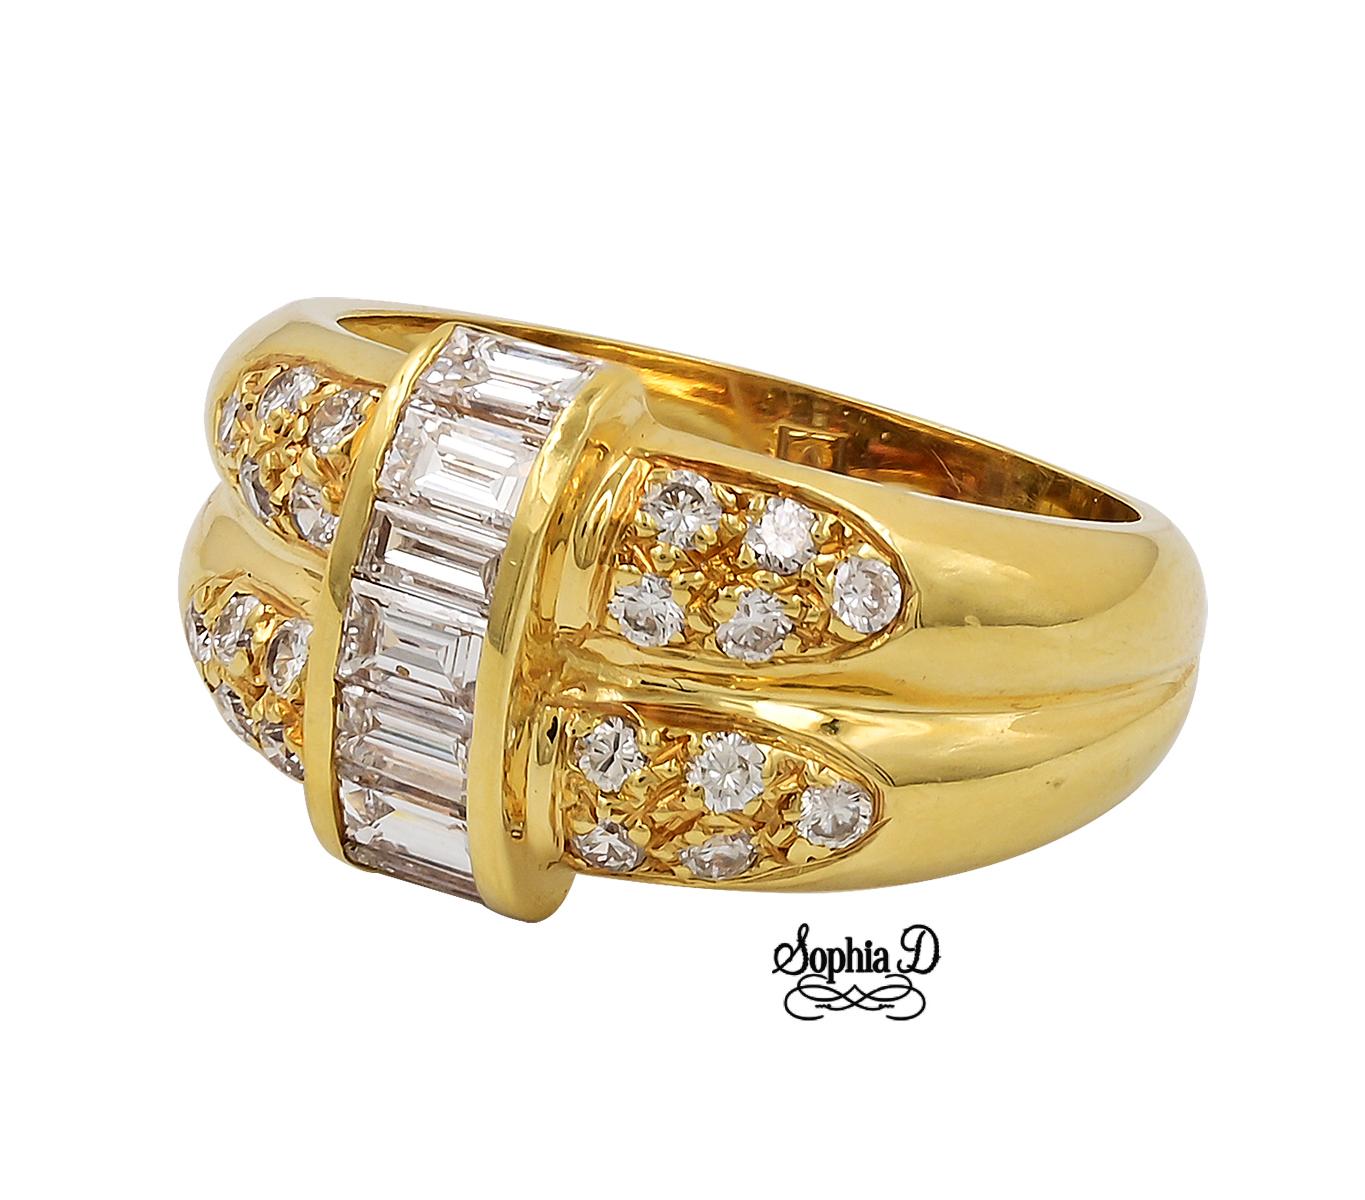 18K yellow gold ring with emerald cut diamonds and small round diamonds.

Sophia D by Joseph Dardashti LTD has been known worldwide for 35 years and are inspired by classic Art Deco design that merges with modern manufacturing techniques.  